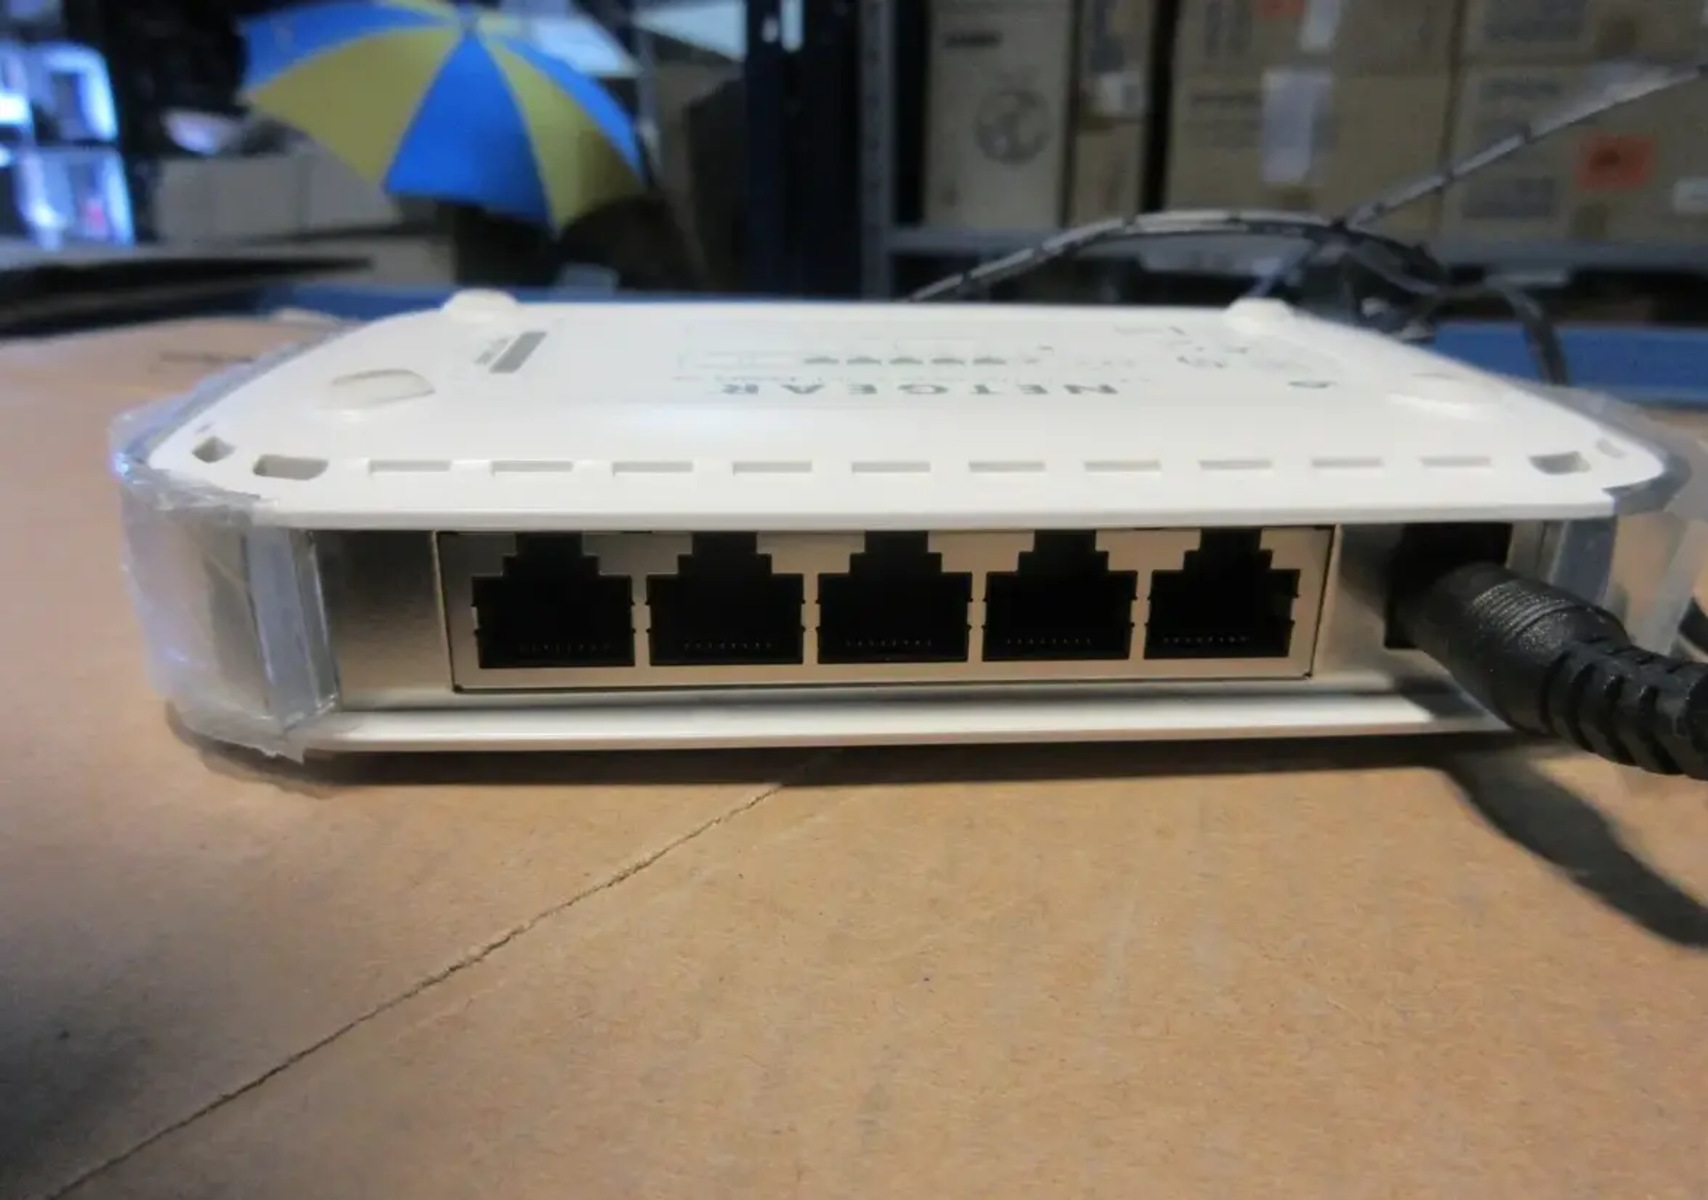 How To Connect A Netgear FS605 V3 5-Port 10/100 Mbps Network Switch